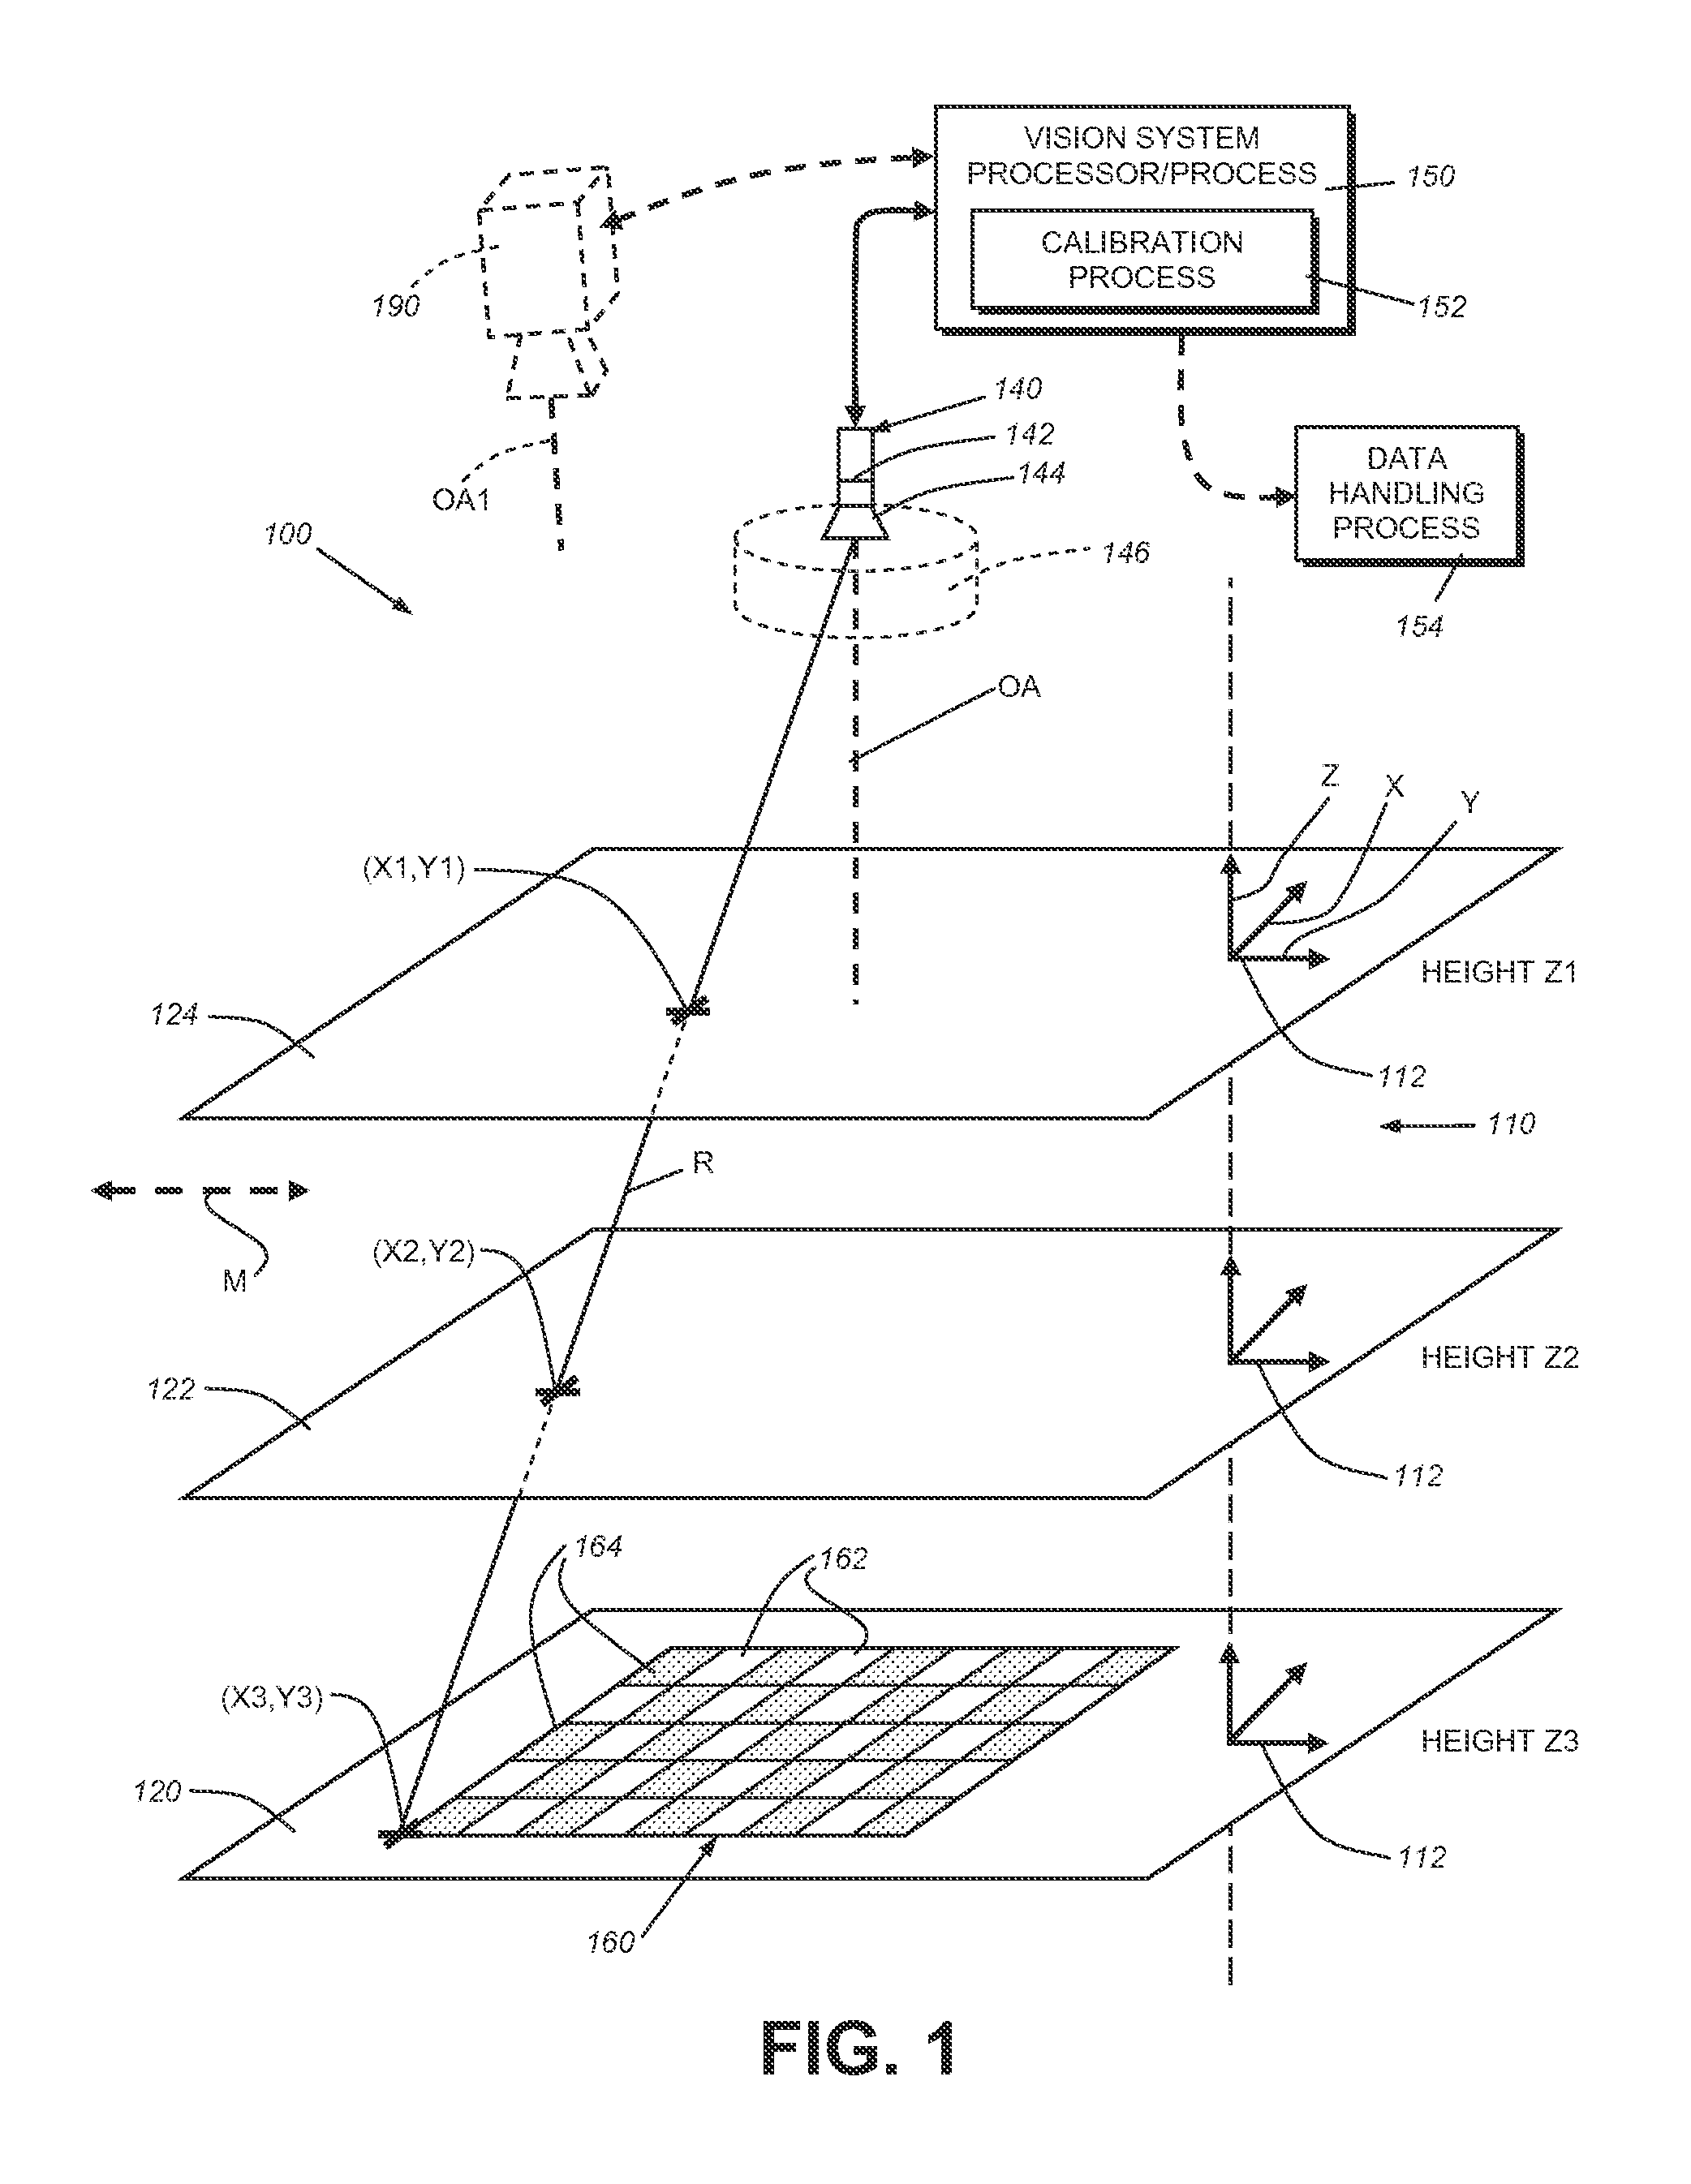 System and method for calibration of machine vision cameras along at least three discrete planes